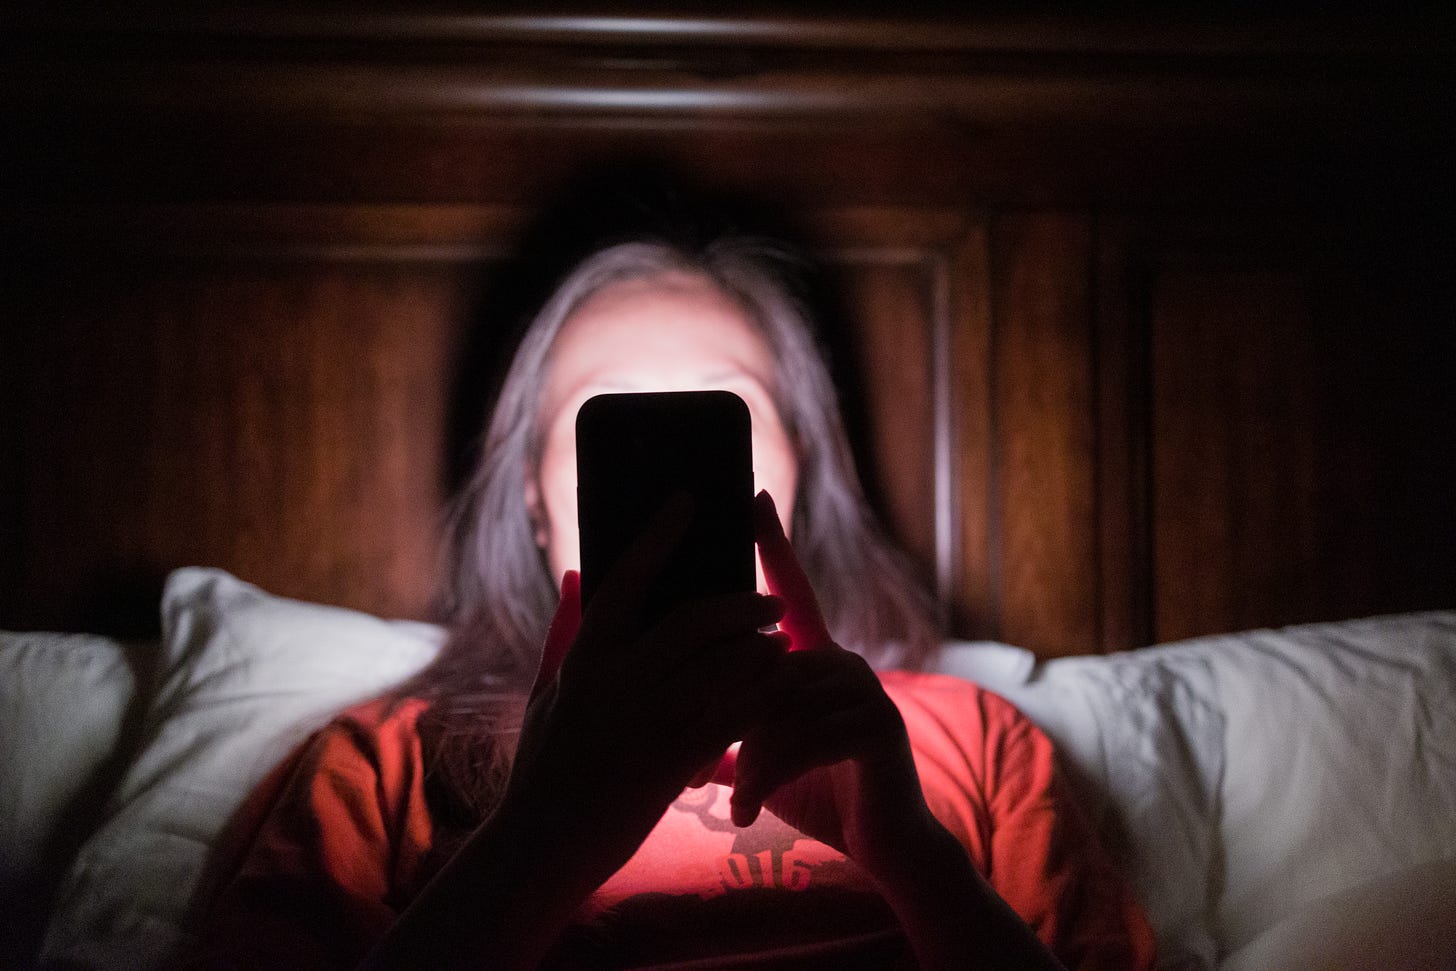 person looking at their phone in bed propped against white pillows